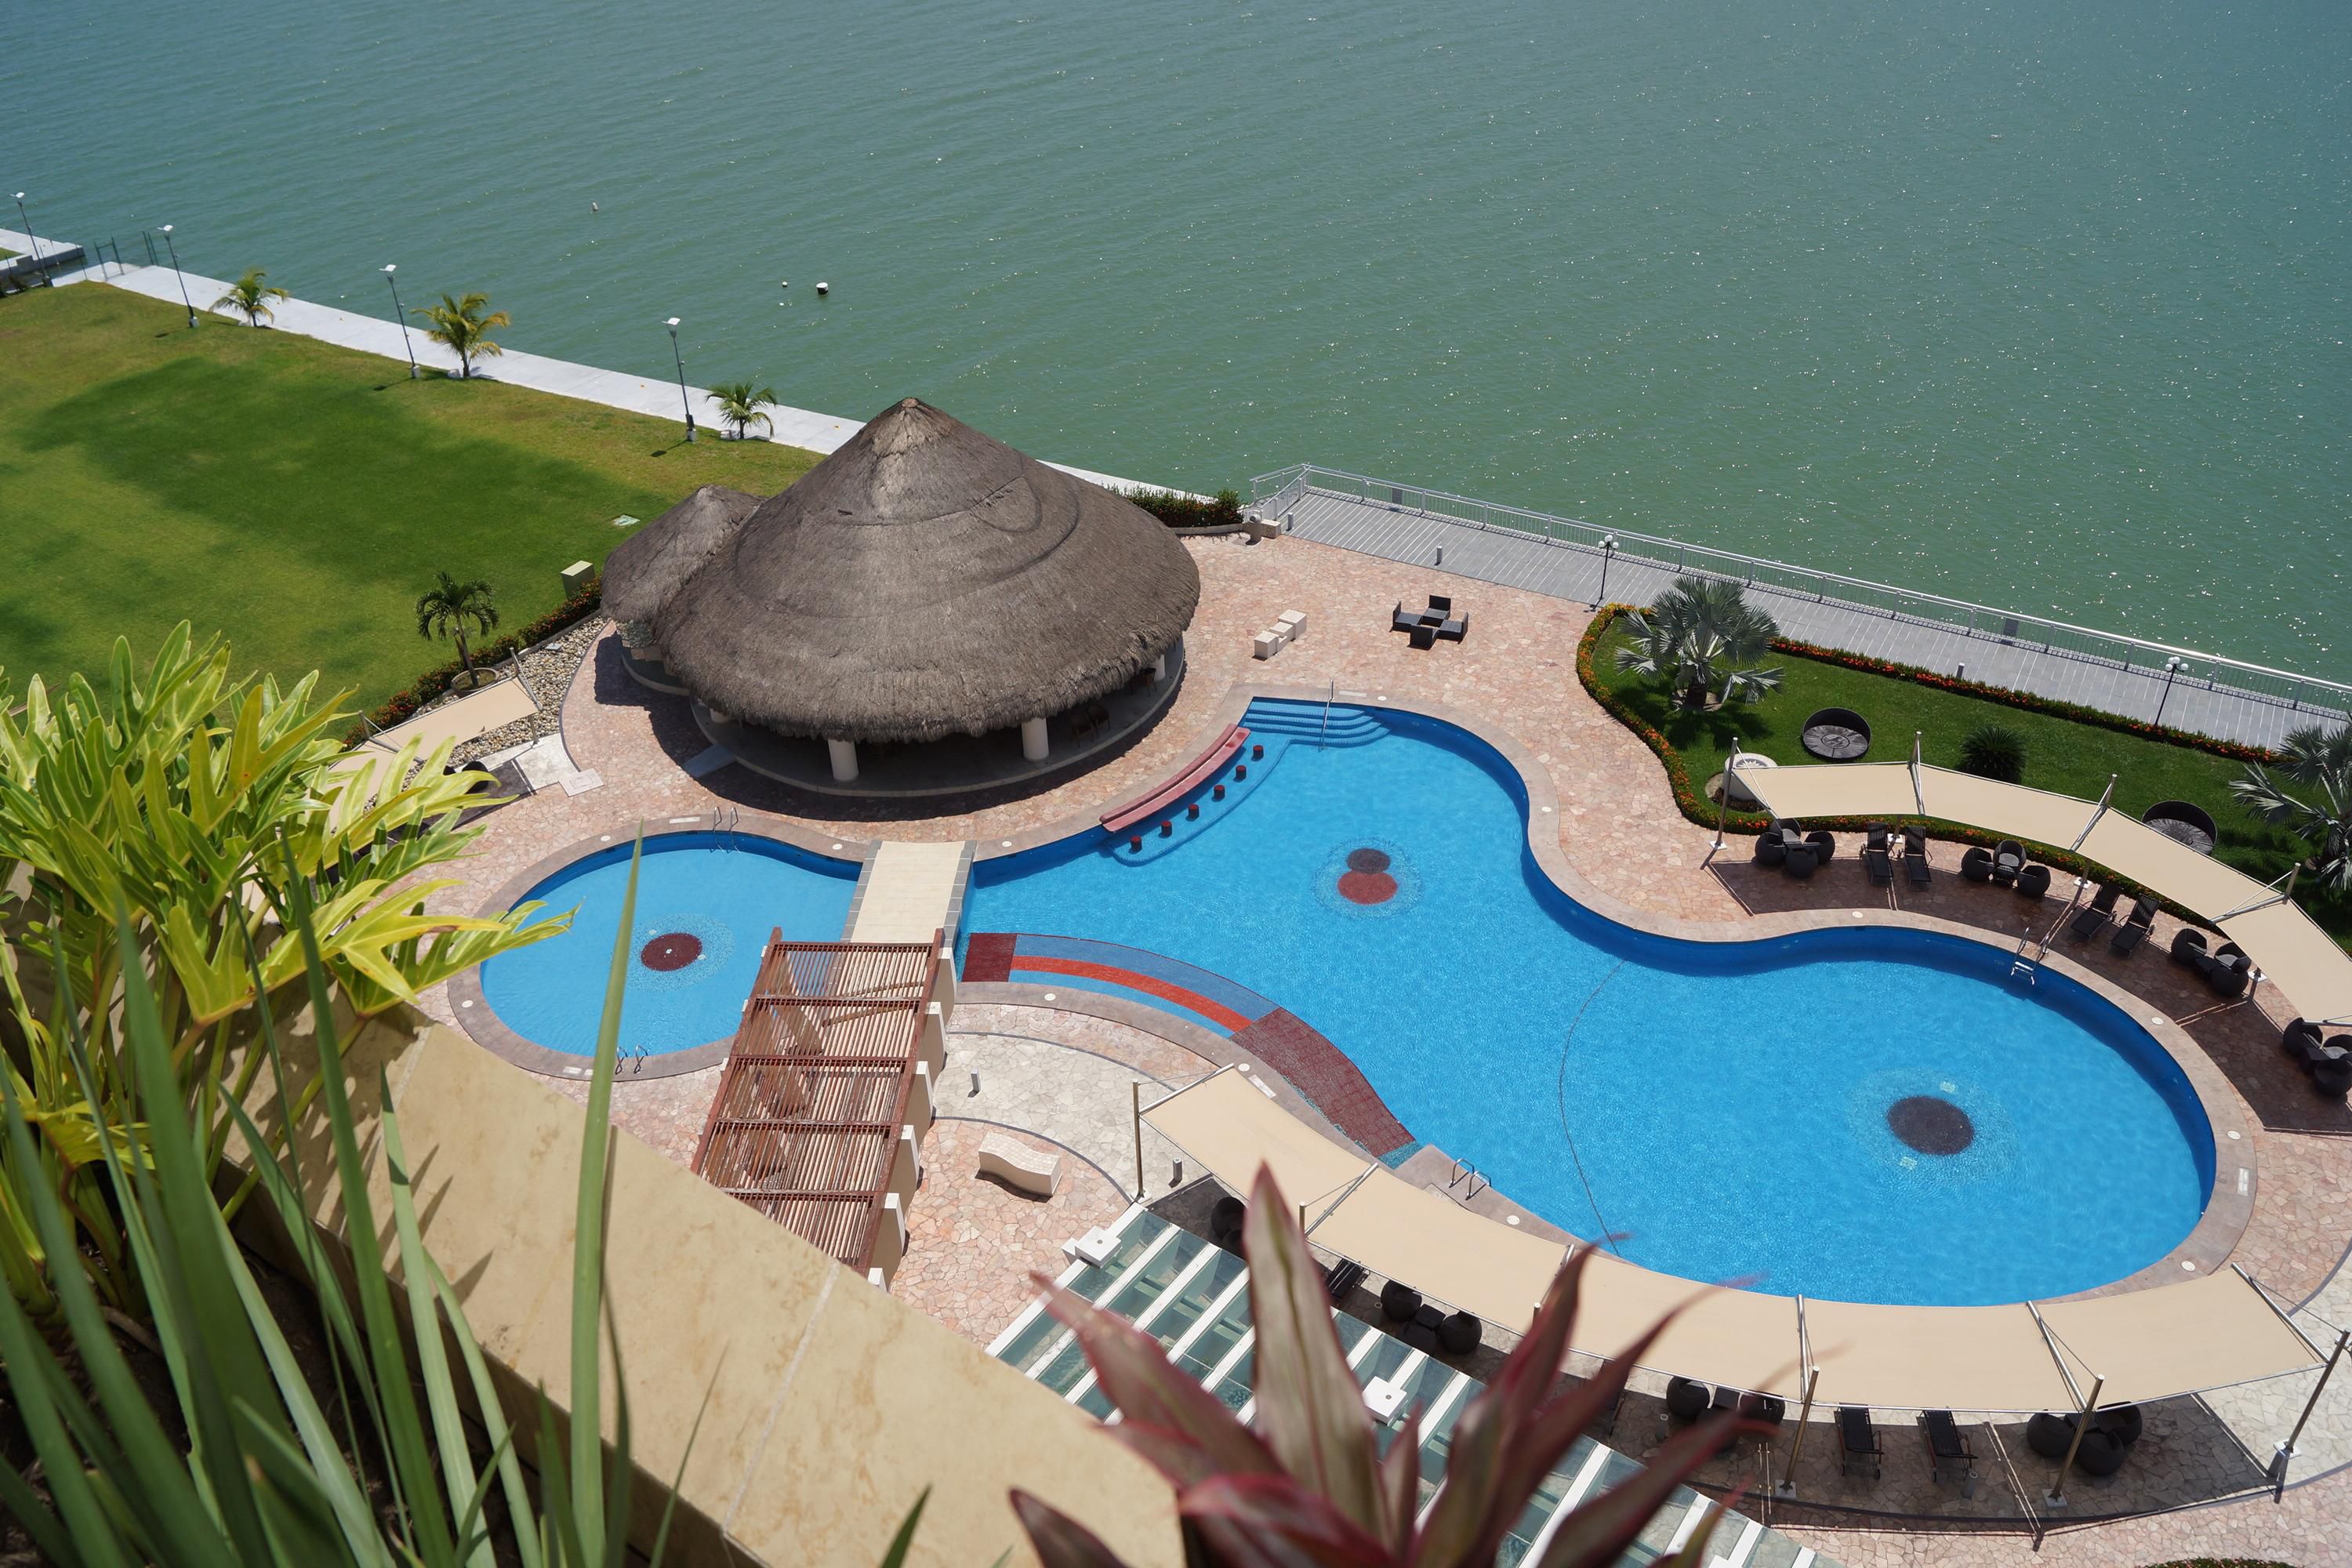 Pool and palapa area from the top